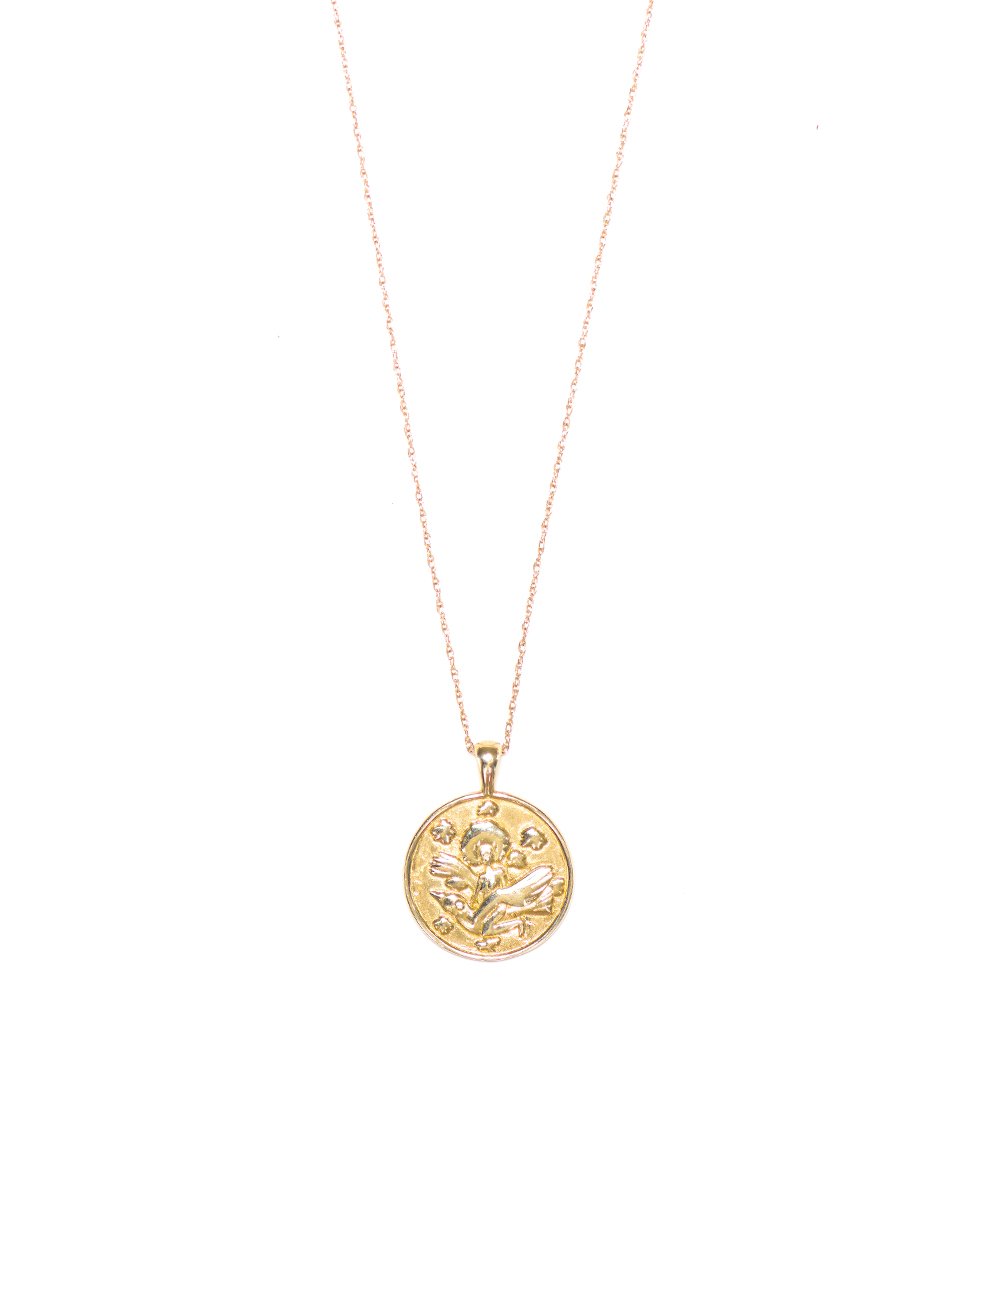 Anywhere, Anywhere Medallion Thin Chain - Gold Plated w/ Gold Fill Chain